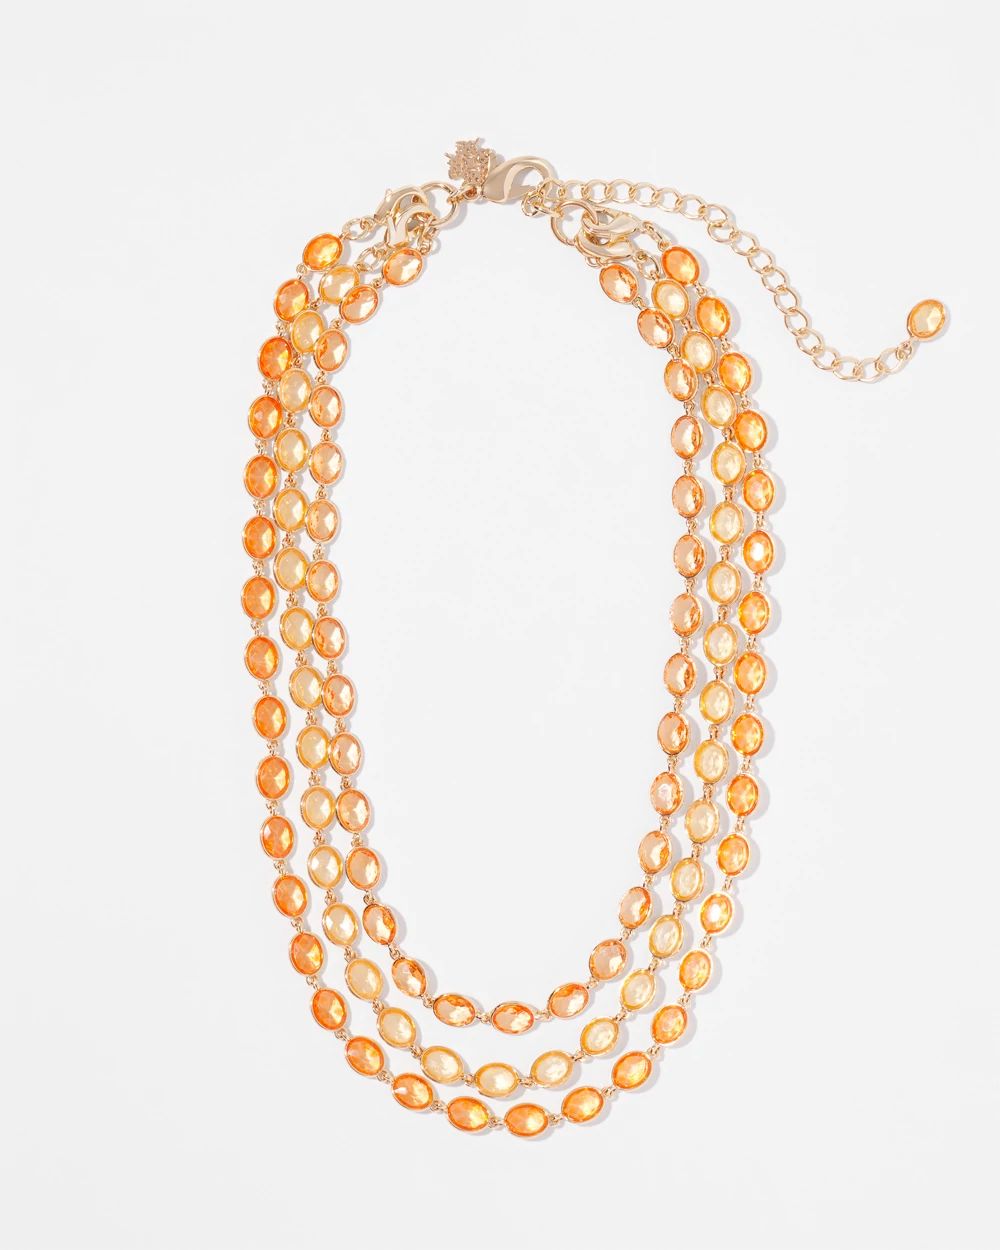 Gold + Peach Crystal Necklace click to view larger image.